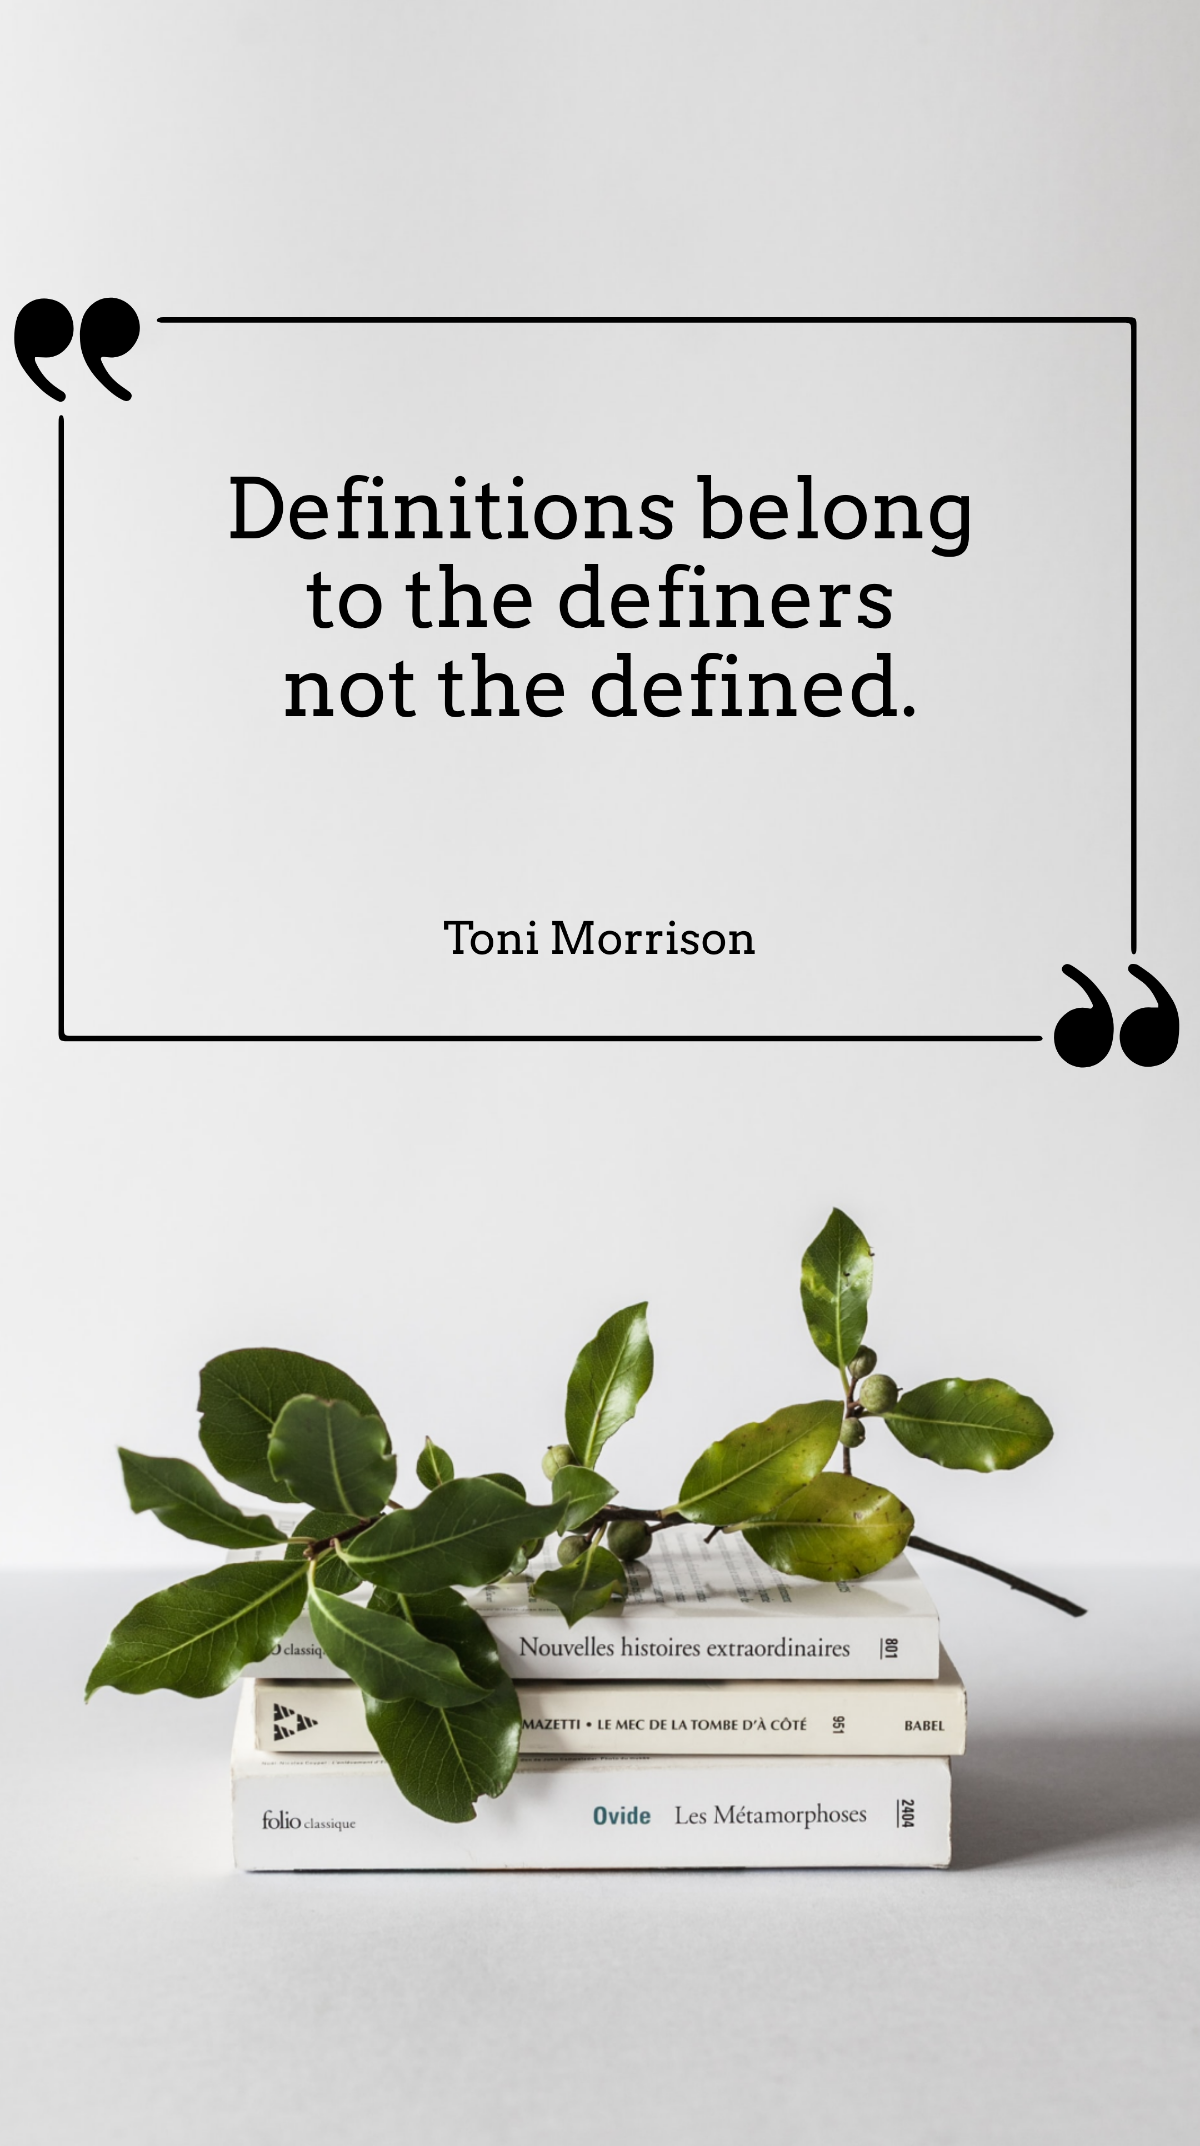 Toni Morrison - Definitions belong to the definers not the defined. Template